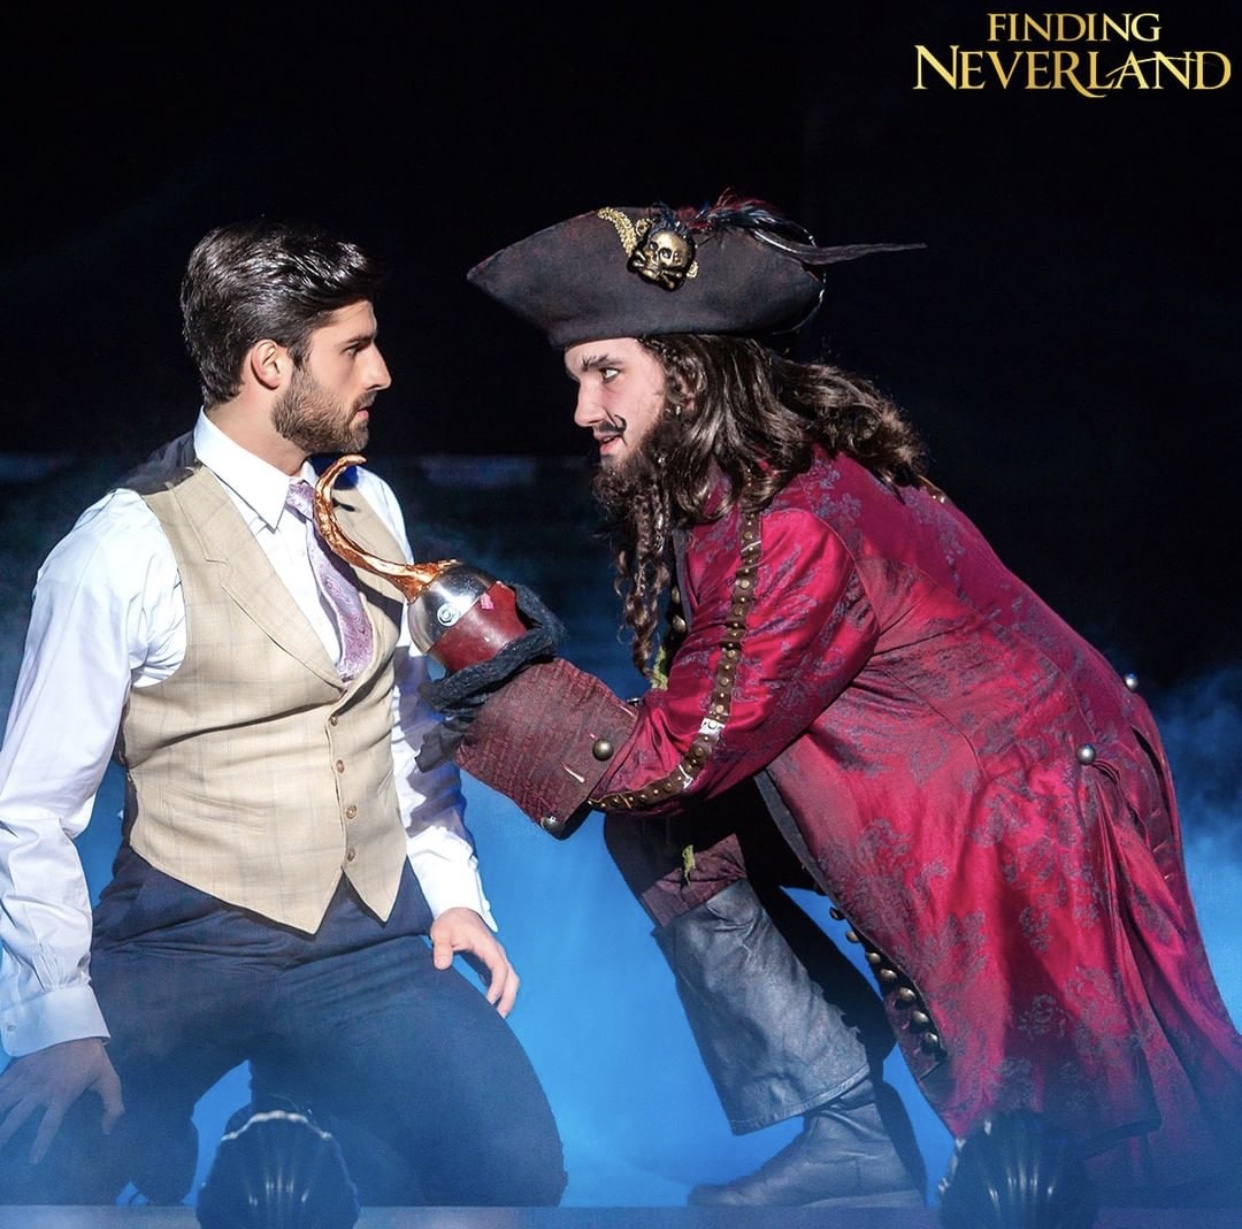 FINDING NEVERLAND to Fly to Ohio Theater June 2019 